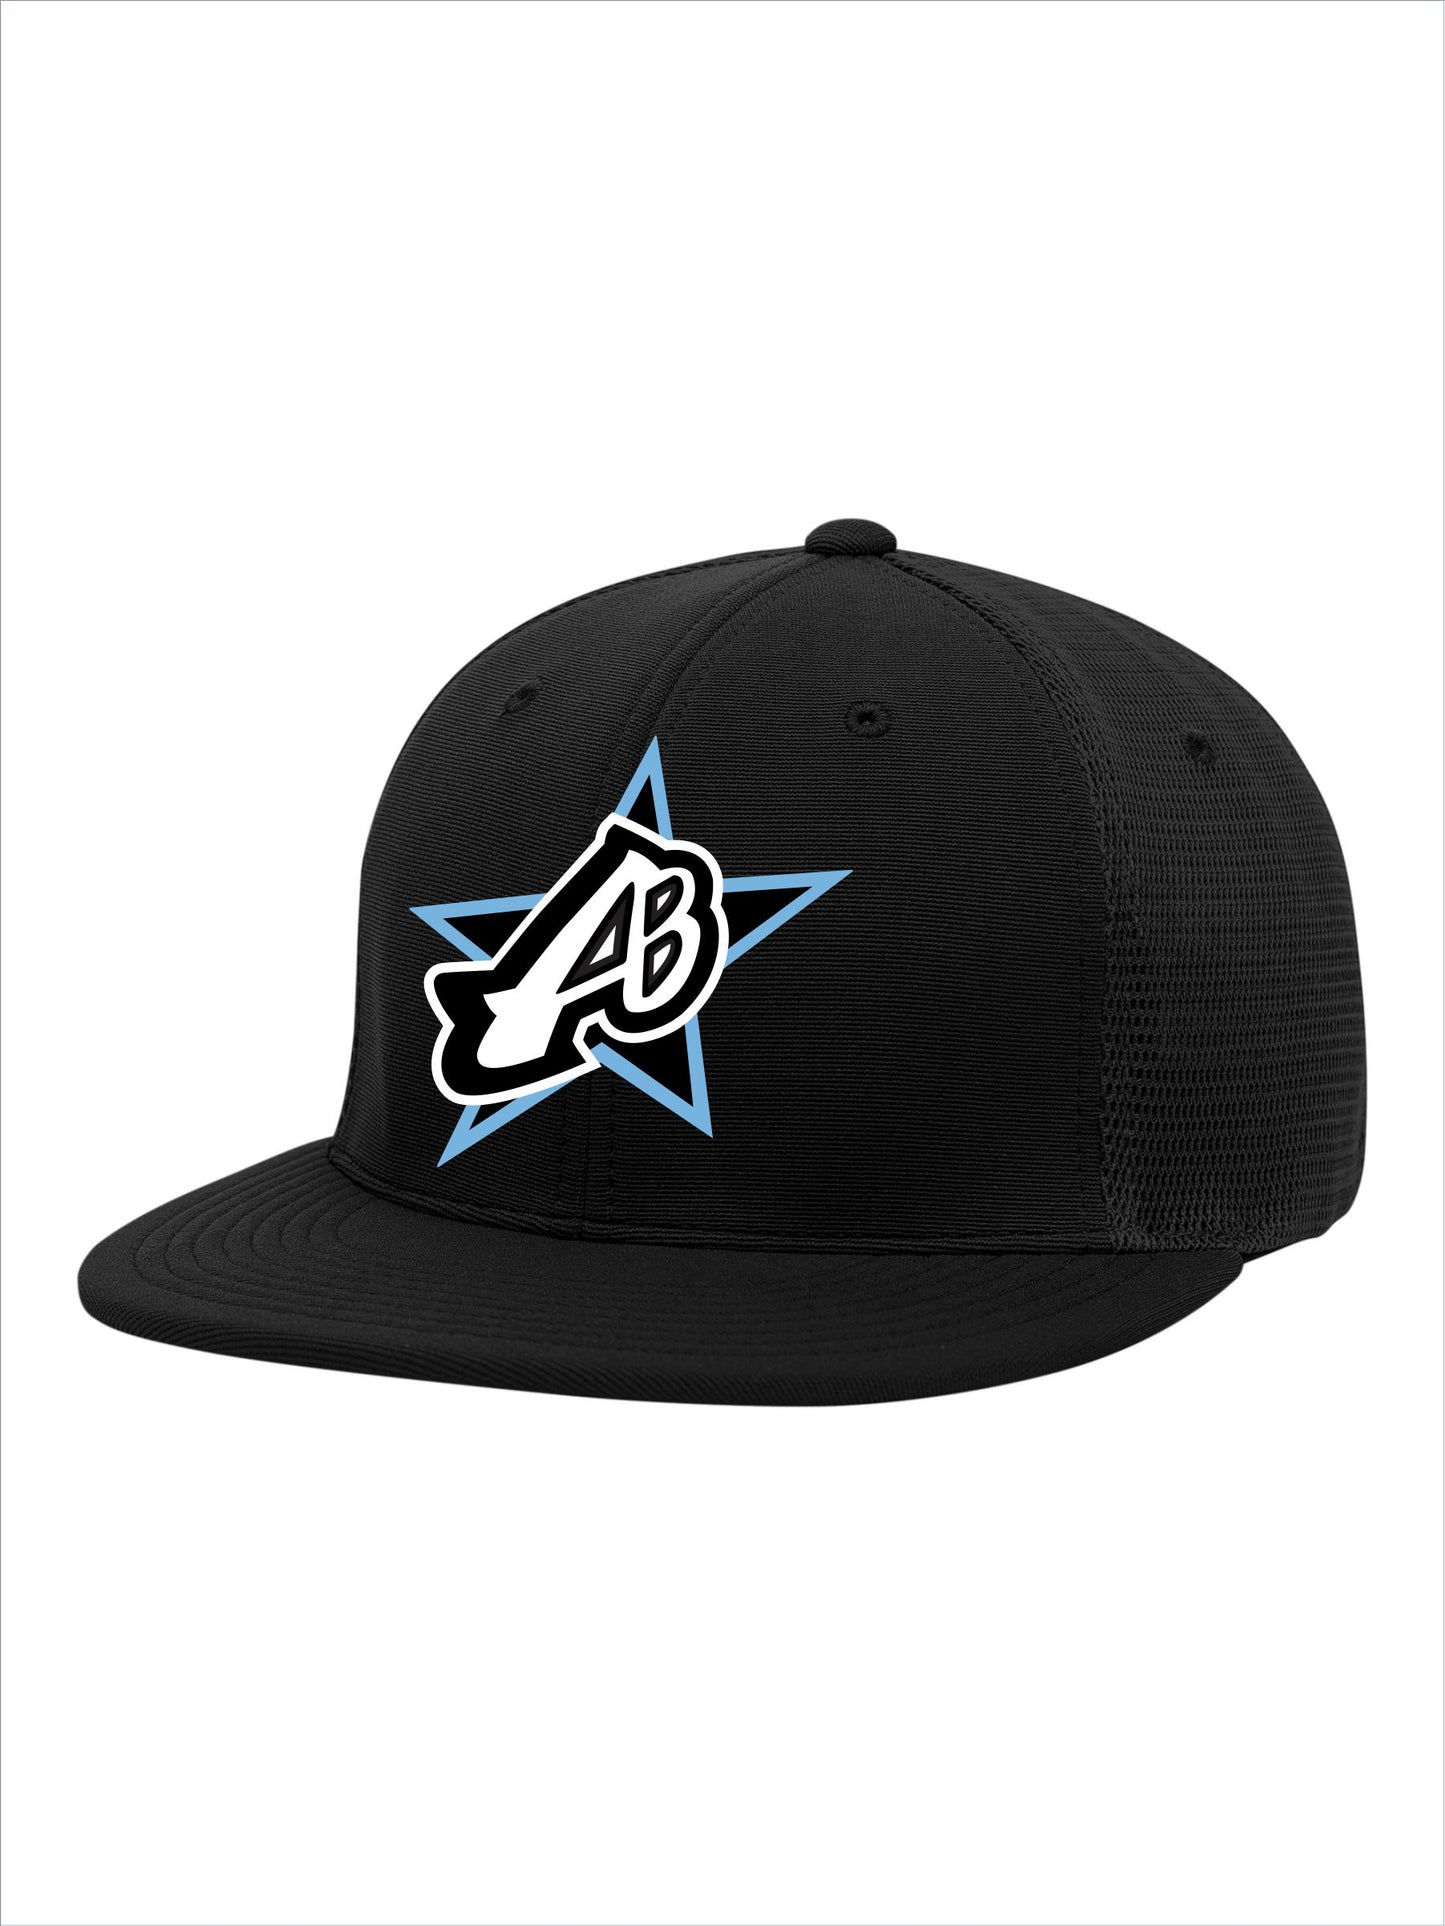 Advantage Baseball Hat with Embroidered Logo